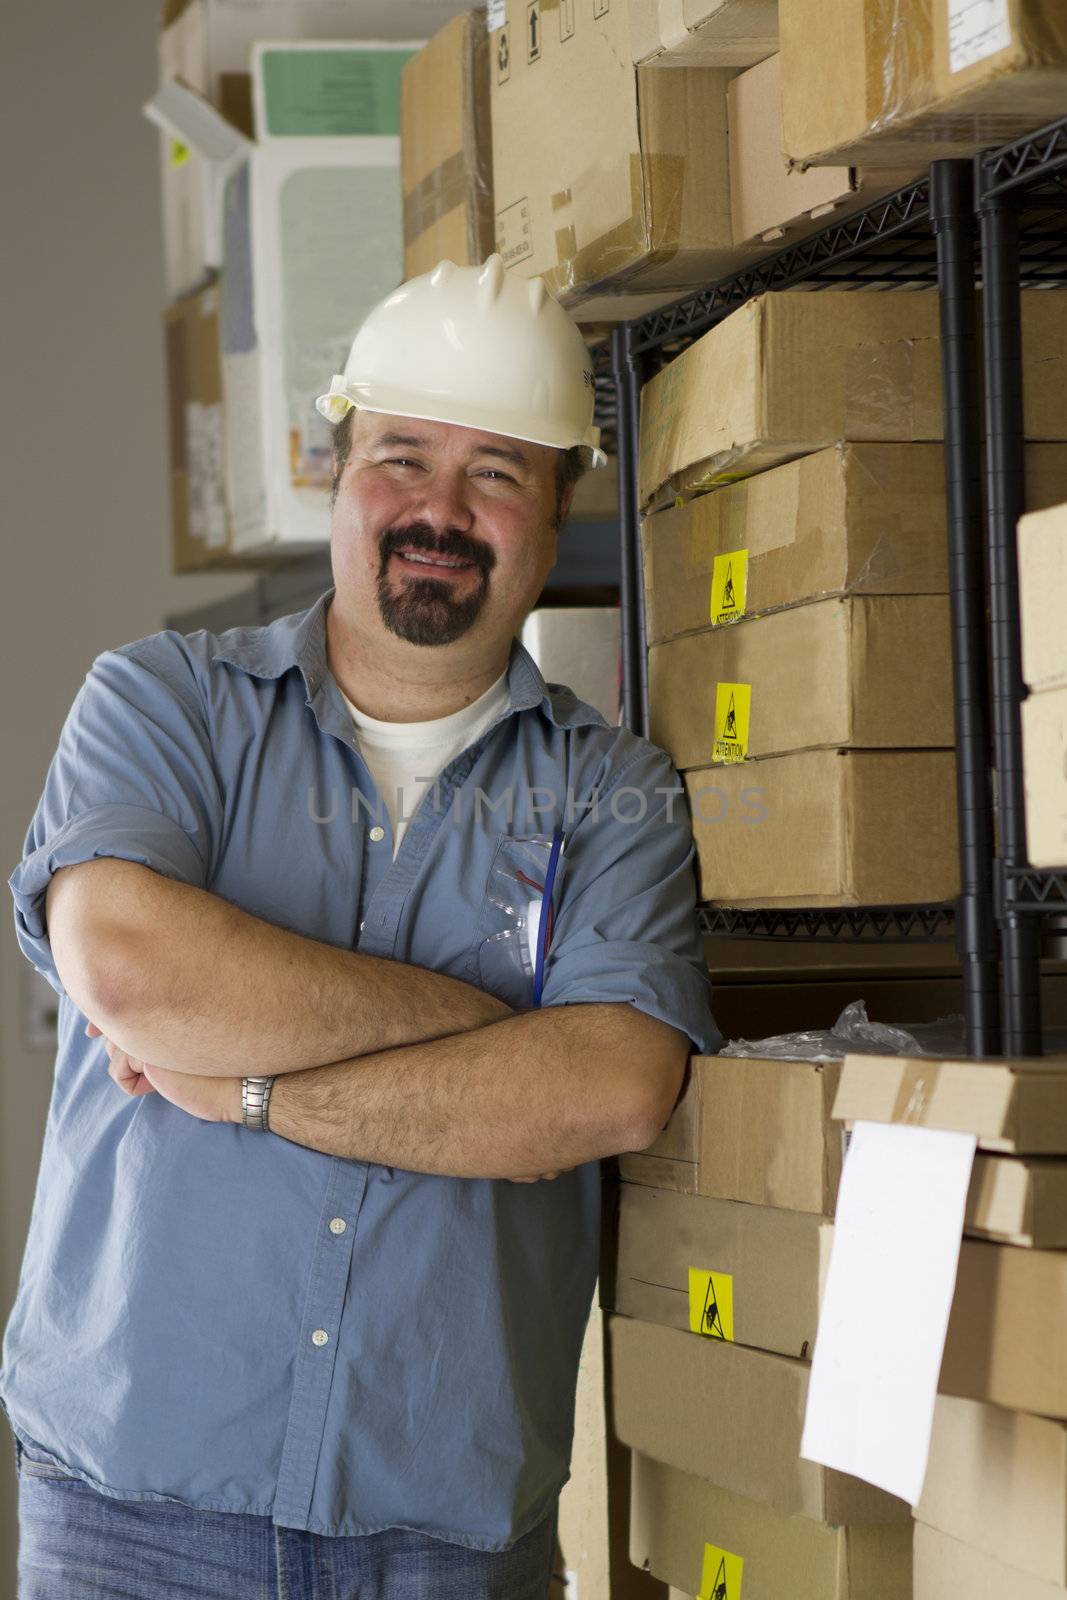 A warehouse worker posing positively to the camera by the boxes.